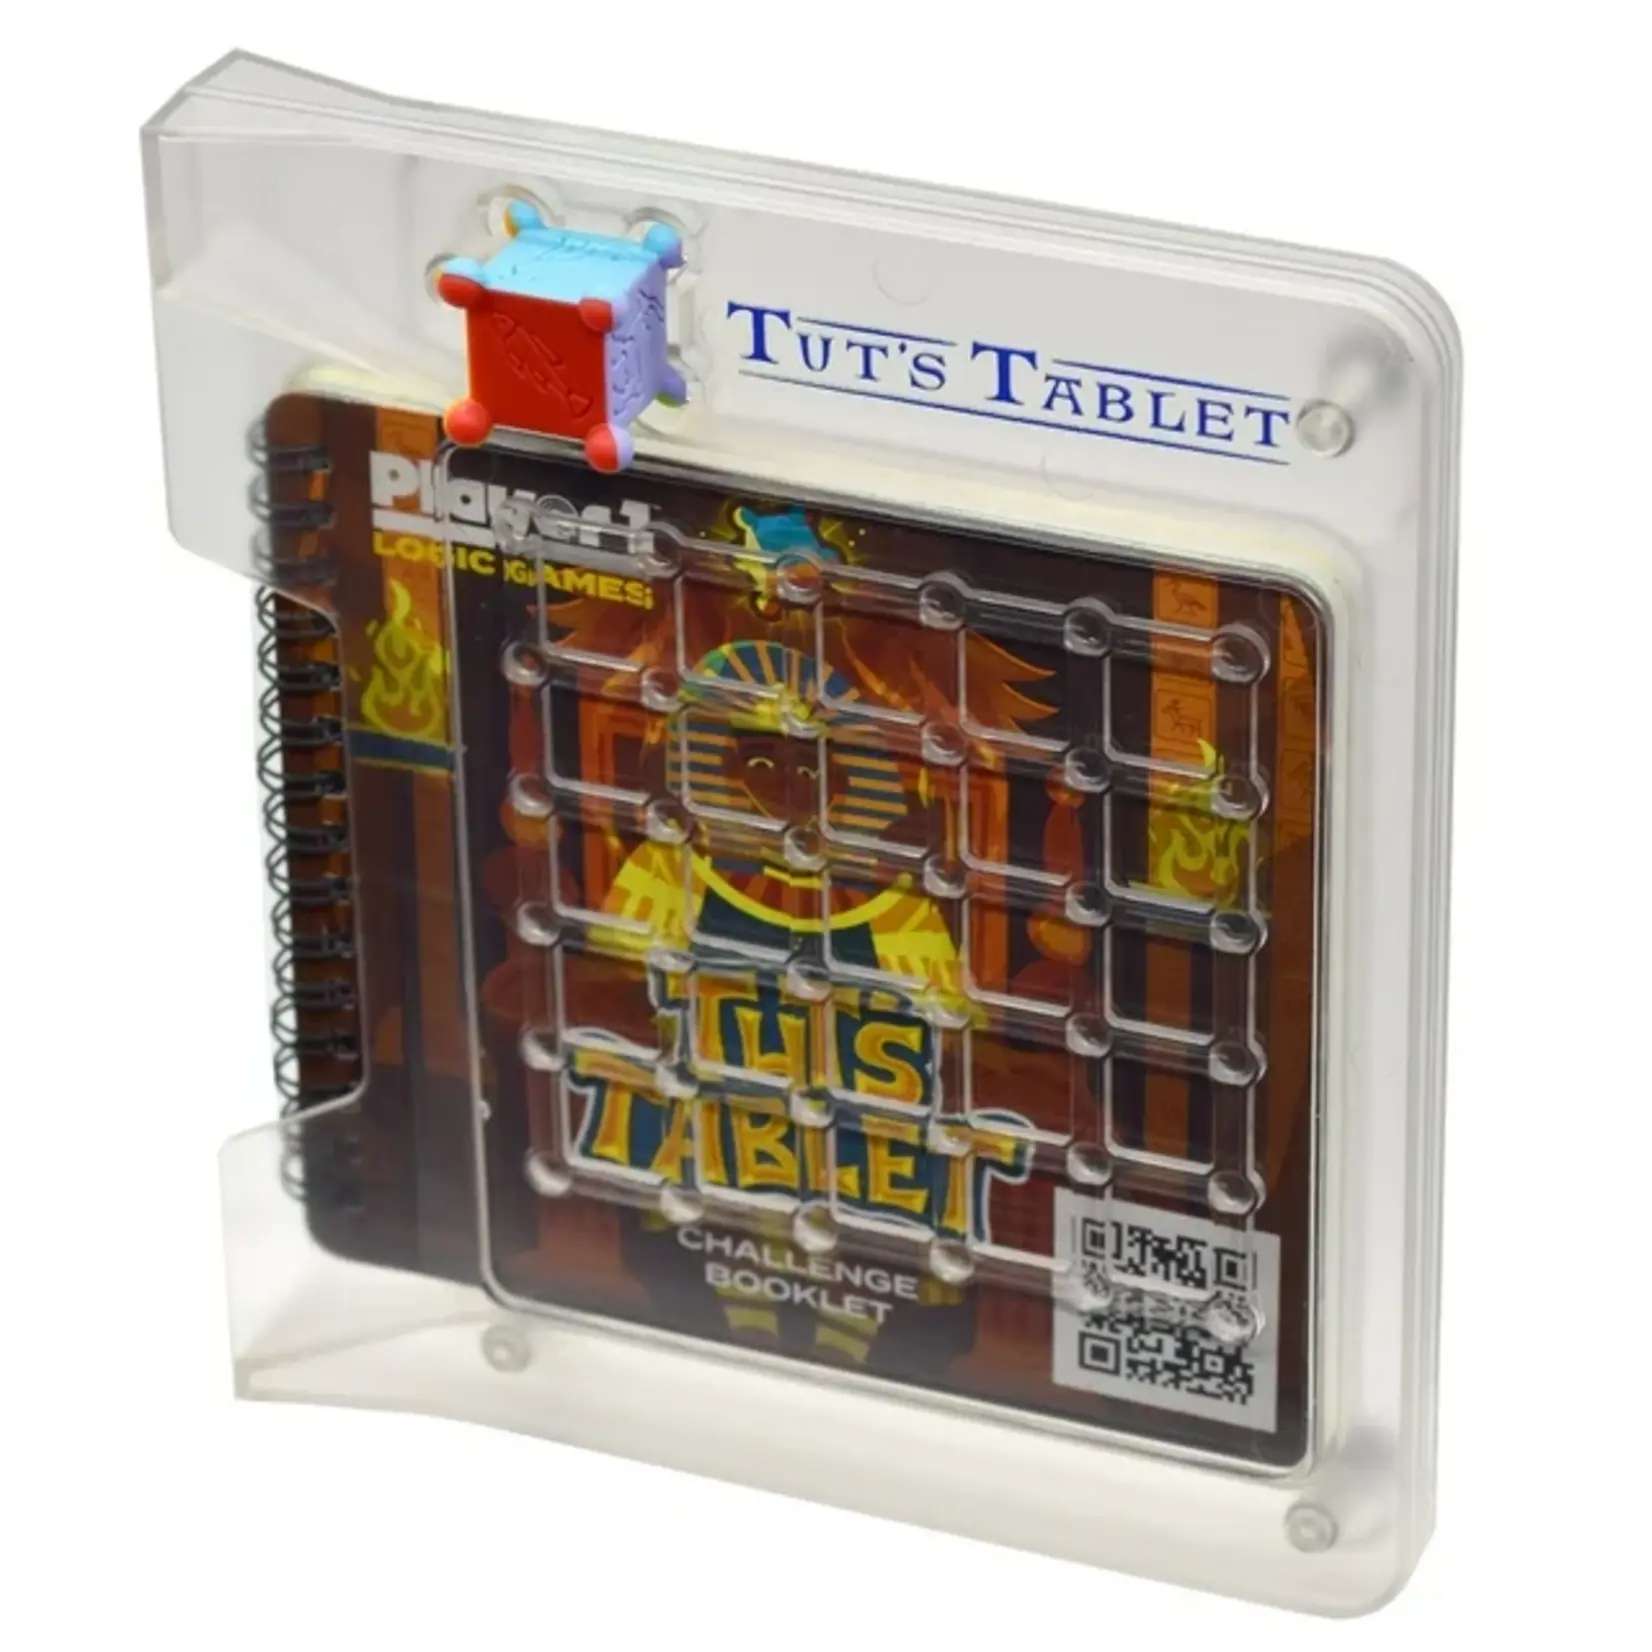 Player 1 Tut's Tablet Game